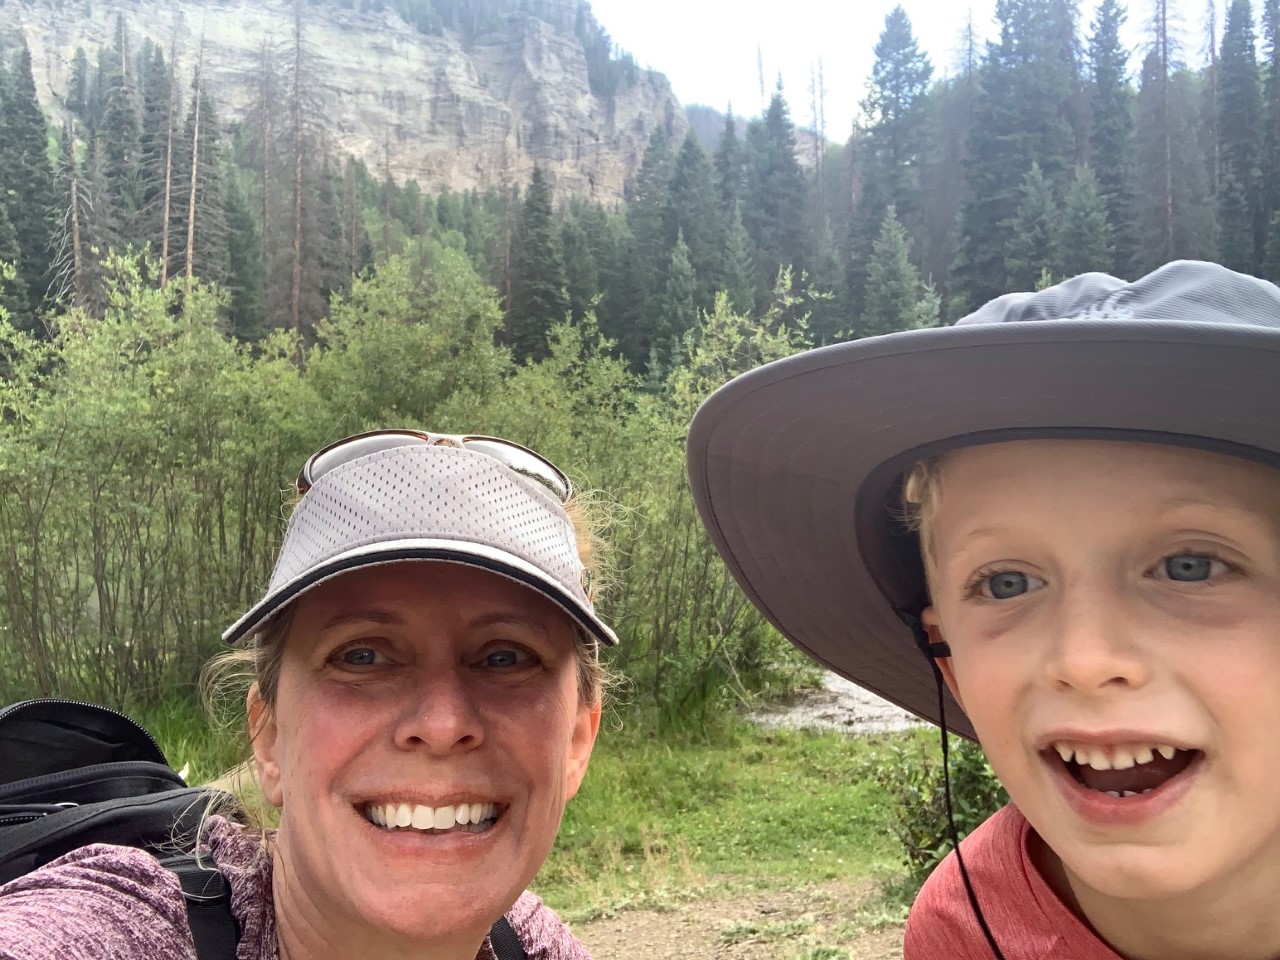 Kristie and her son out hiking with mountain in background